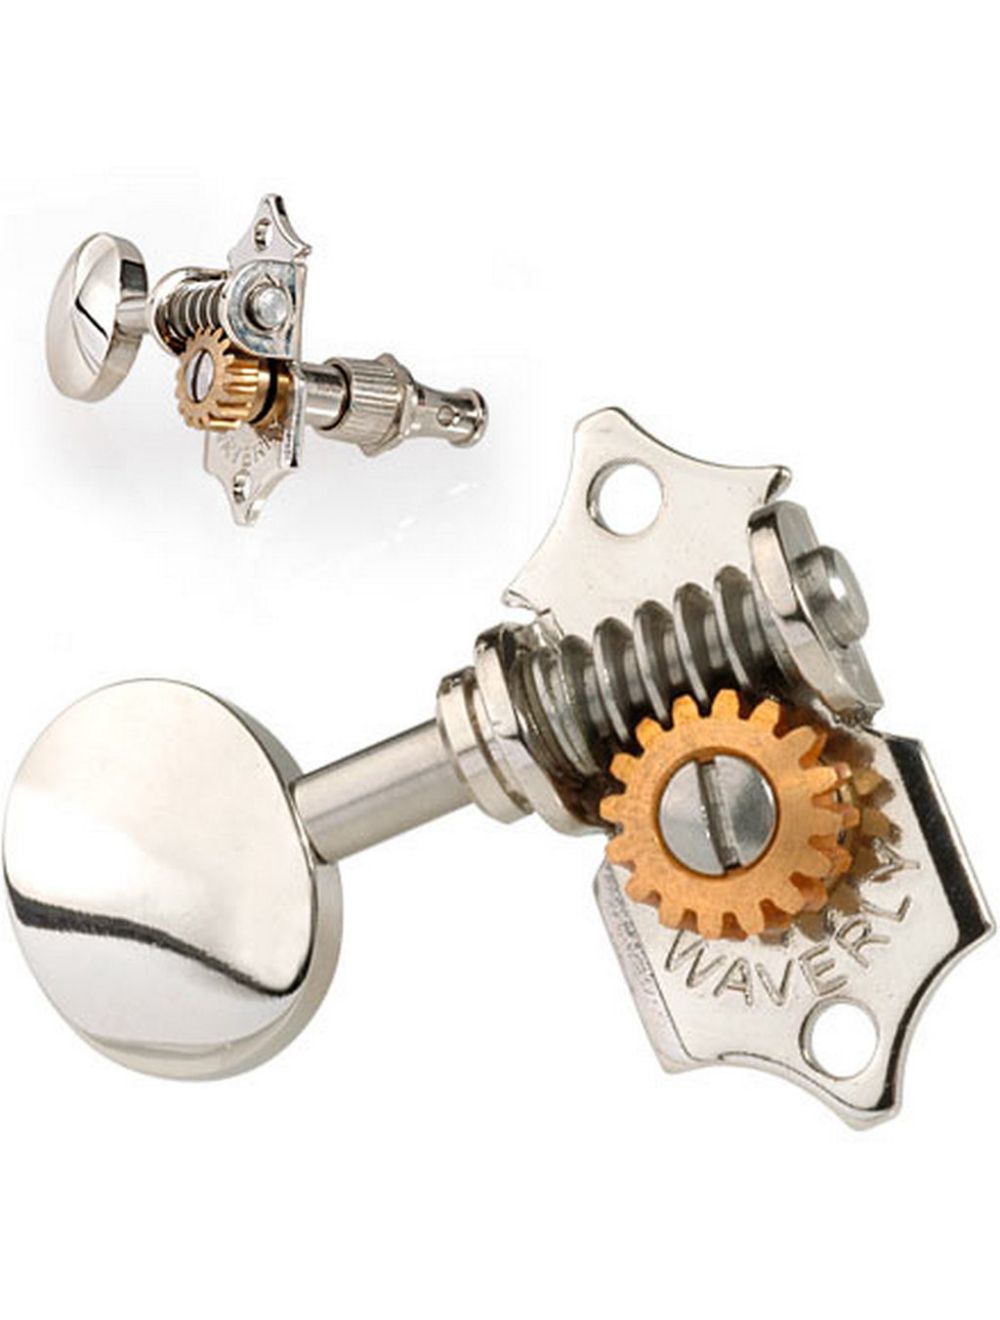 Waverly Guitar Tuners with Vintage Oval Knobs - Nickel